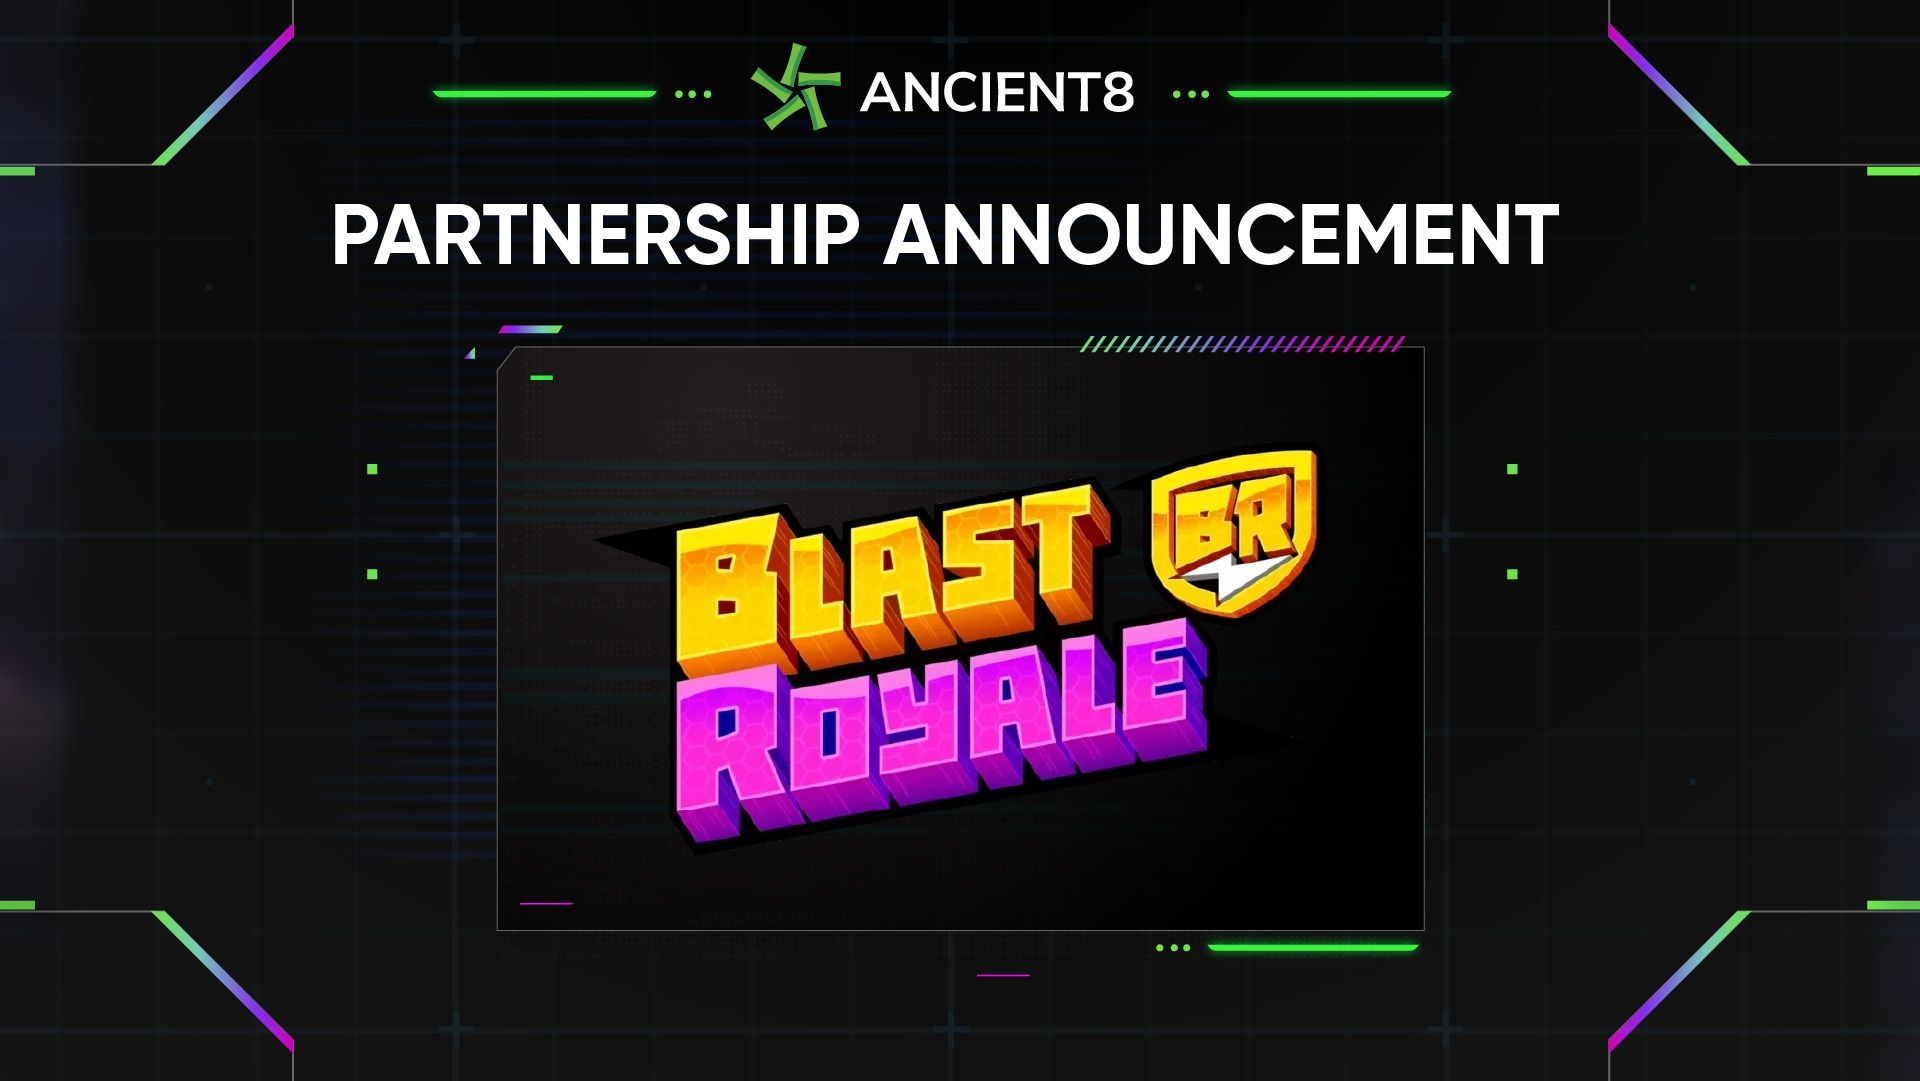 Ancient8 partners with Blast Royale, this blockchain game ushers in a new era